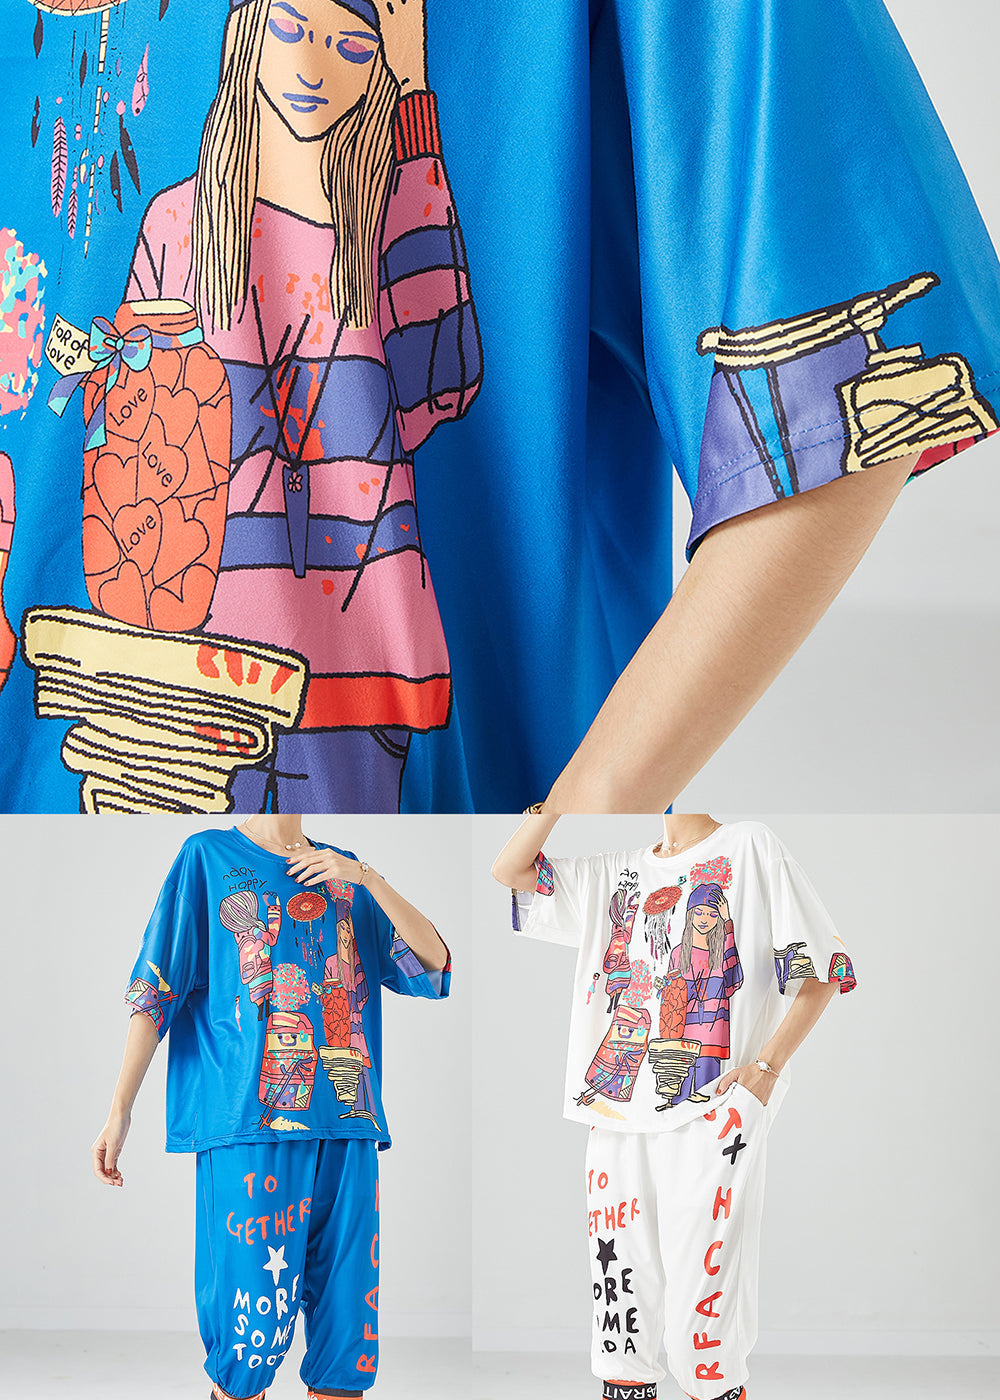 Unique Blue Oversized Print Silk Tops And Pants Two Pieces Set Summer LY6113 - fabuloryshop